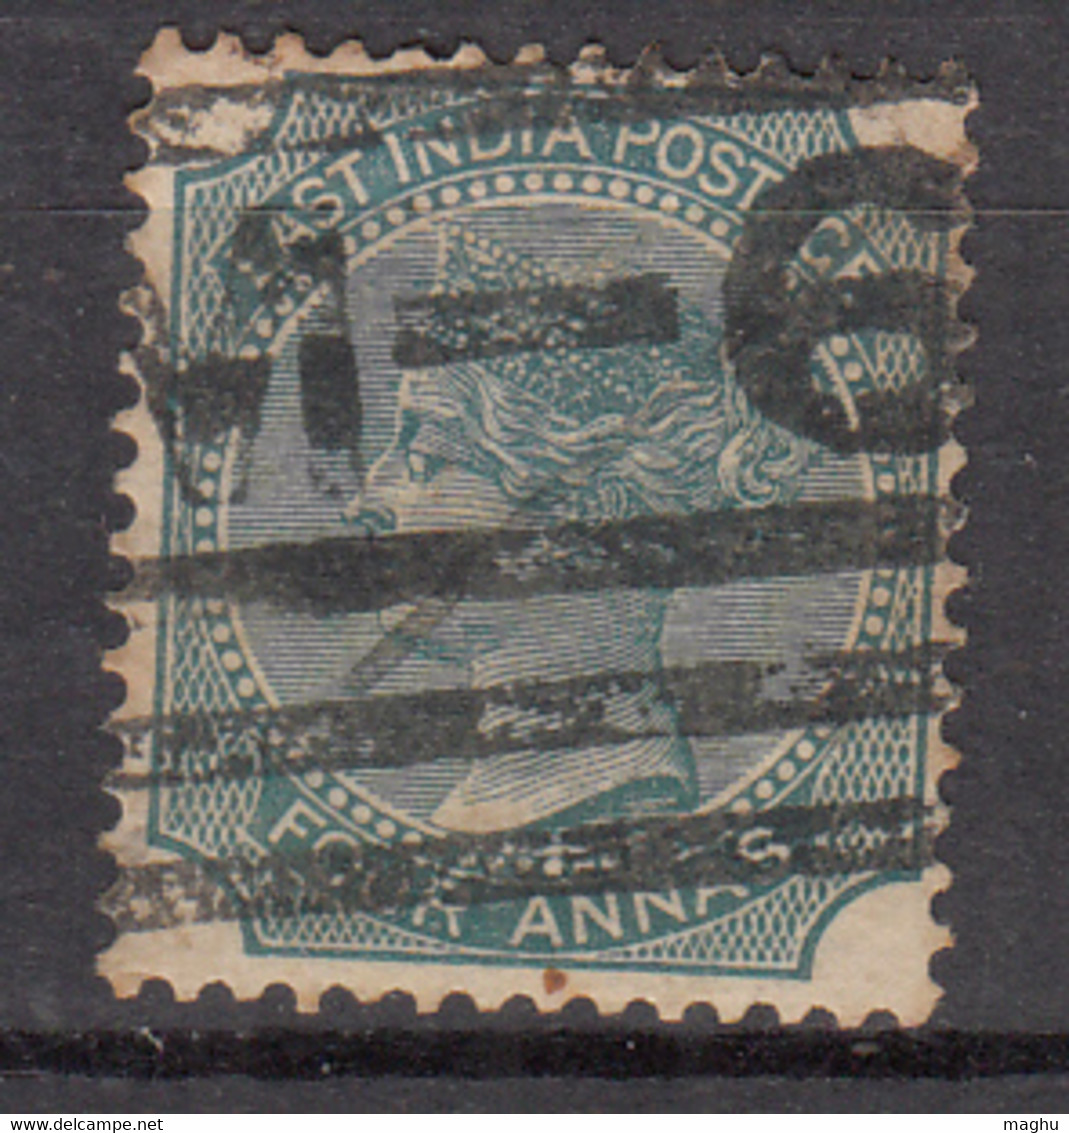 M-6 (Hyderabad) On Four Annas QV JC Type 32b / Martin 17, British East India Used - 1854 East India Company Administration